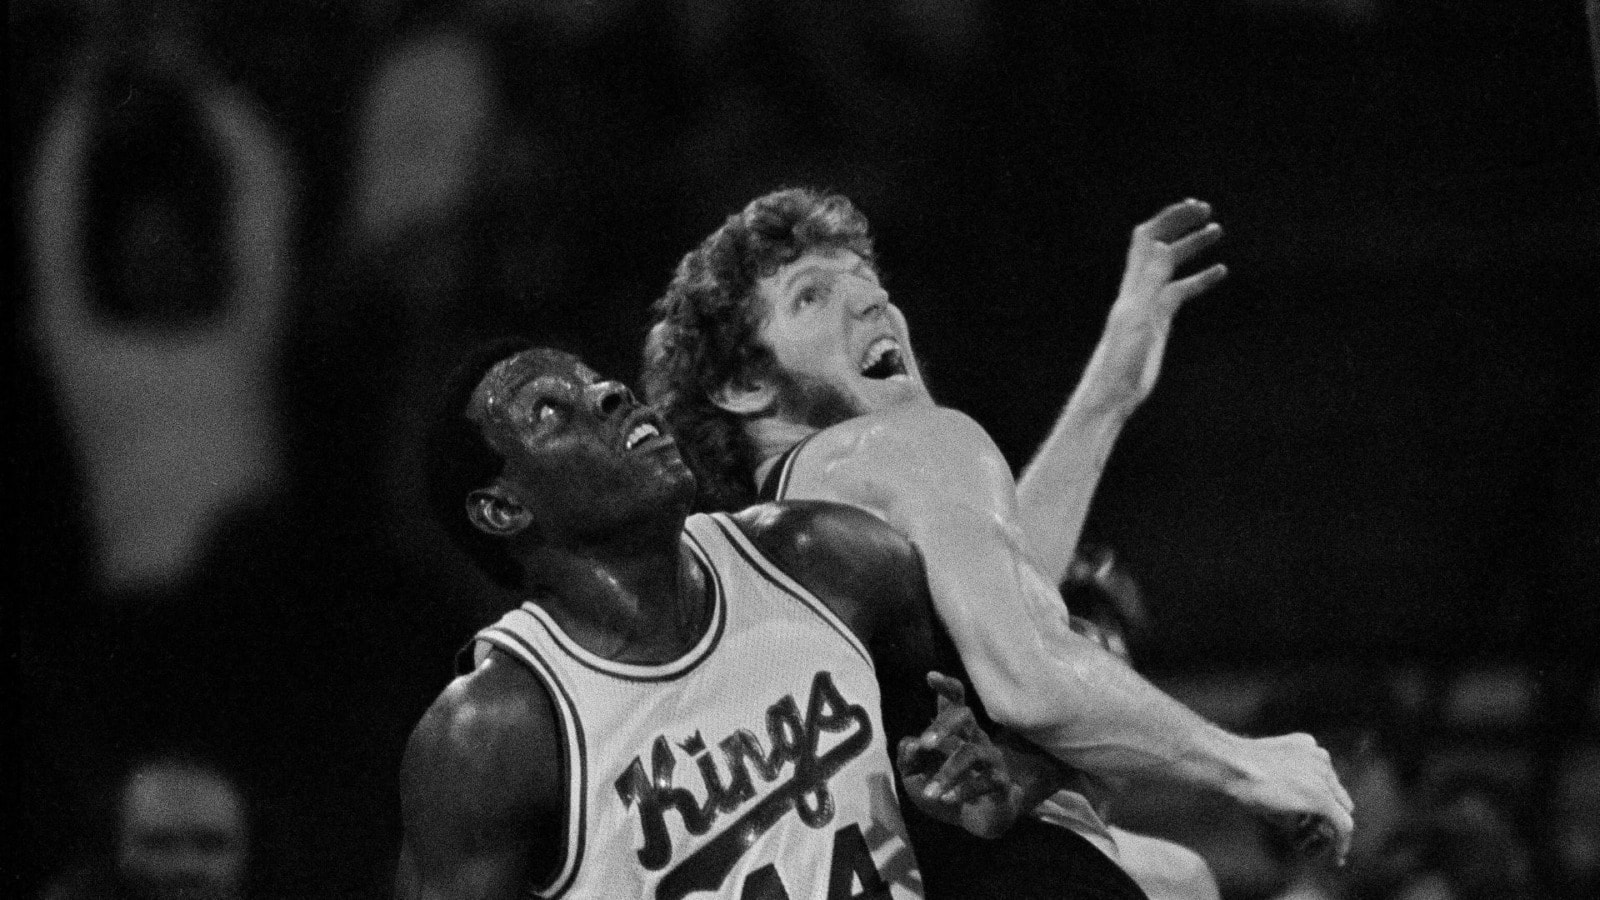 The battle for a rebound position between Kansas City Kings' Sam Lacey, left, and Portland Trail Blazers' Bill Walton, right.